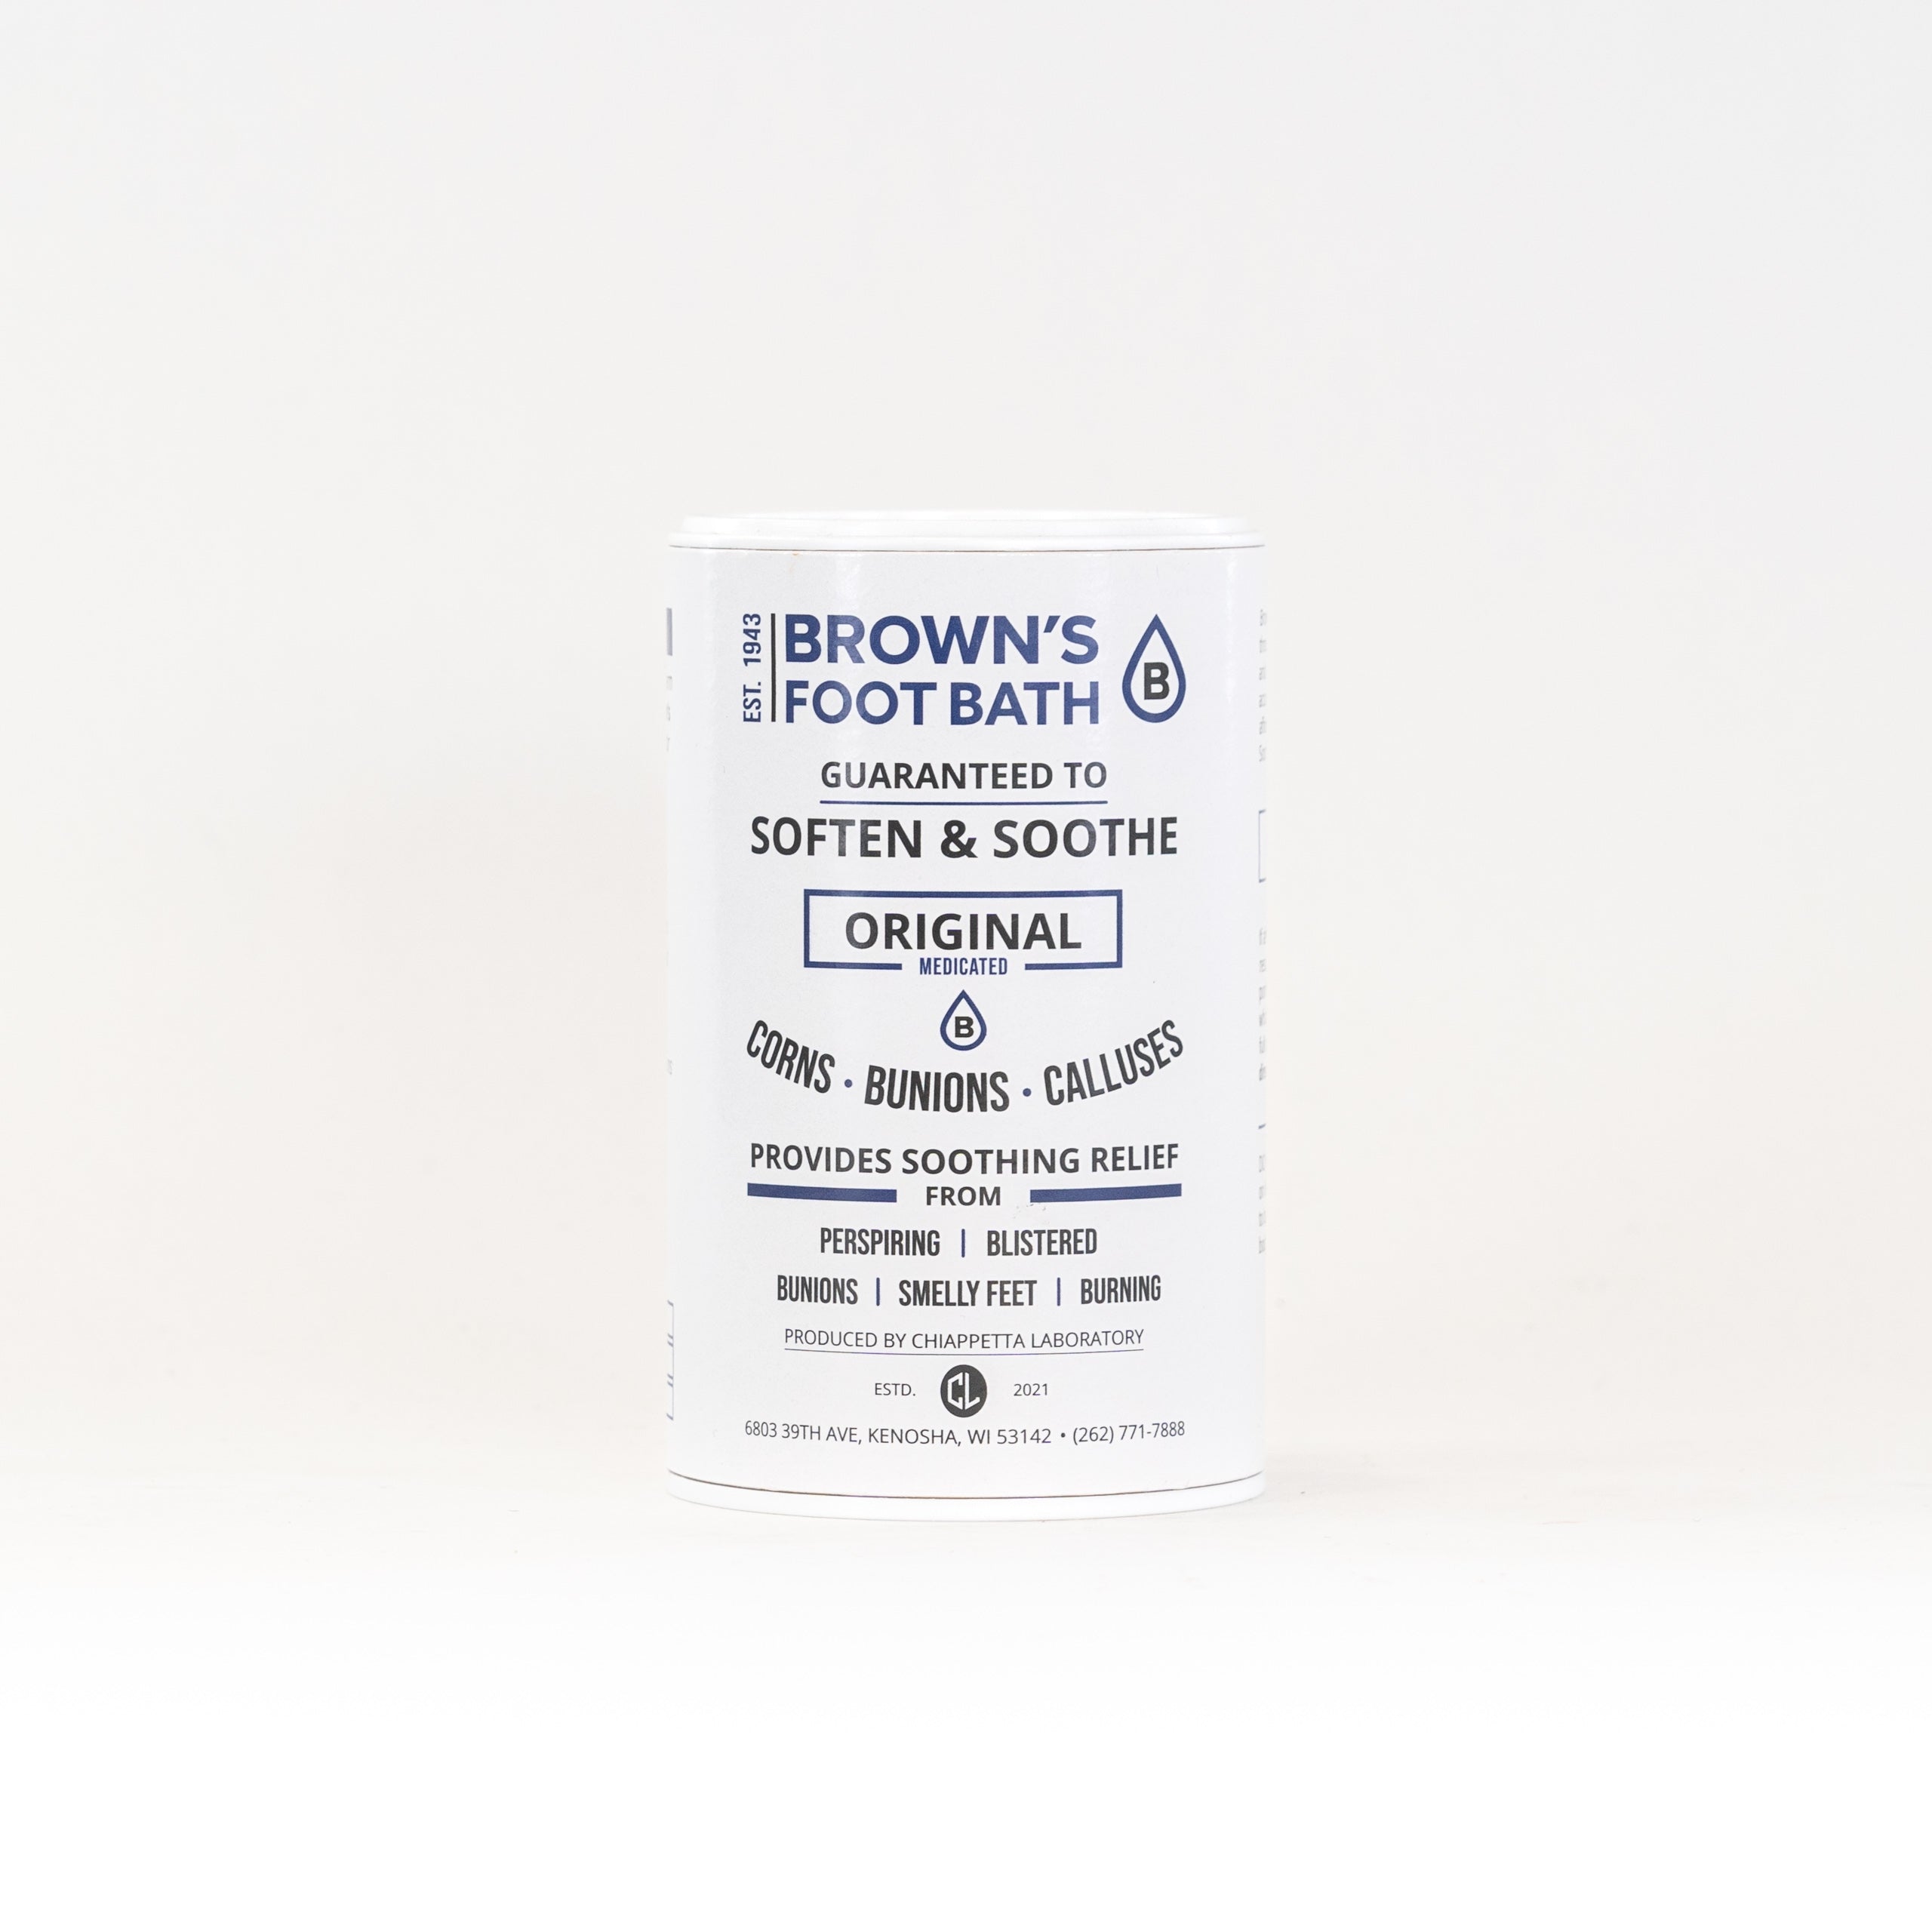 Chiappetta Labs Brown's Medicated Footbath